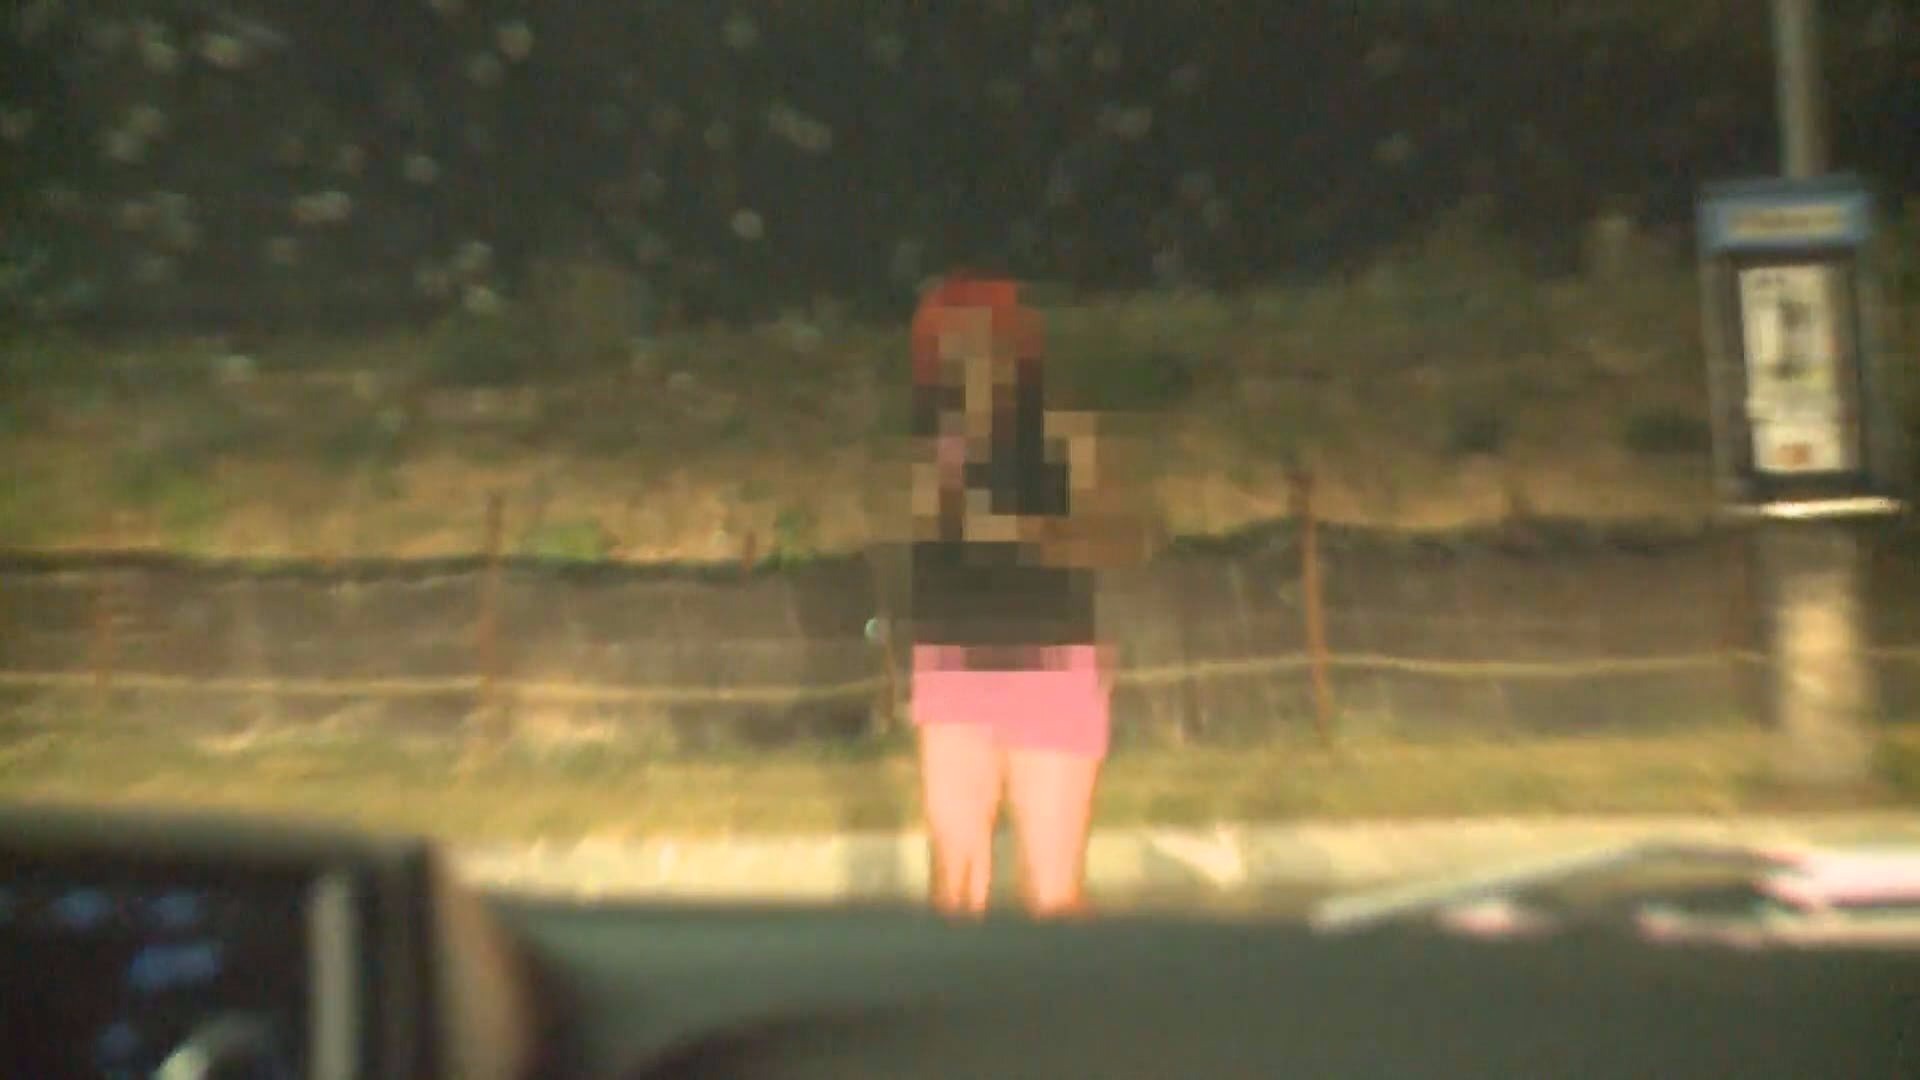 Valley prostitution ring dismantled